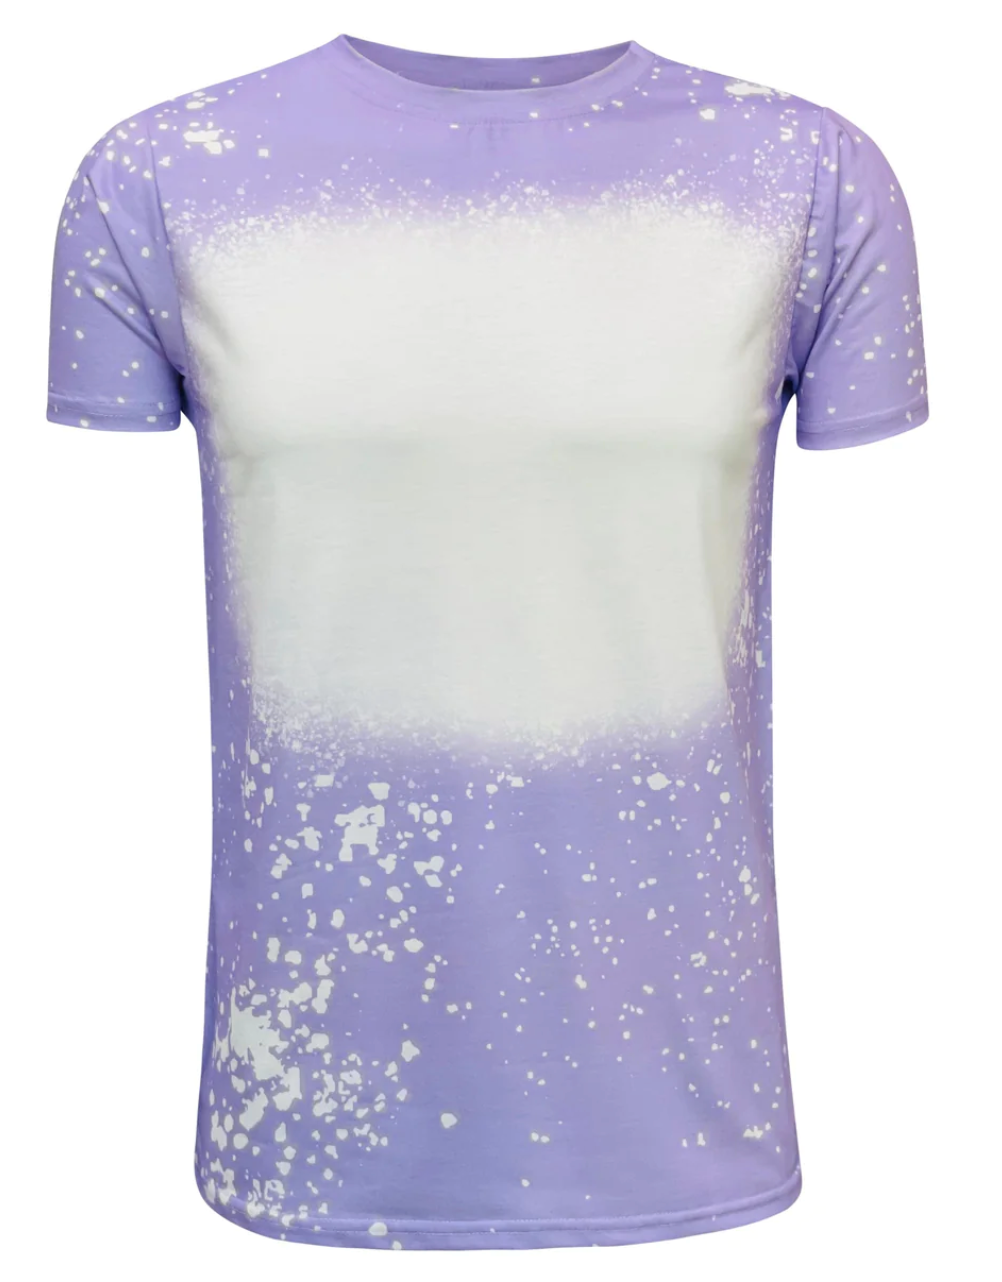 Unisex Faux Bleached Shirts, ready for Sublimation or Screen Transfer